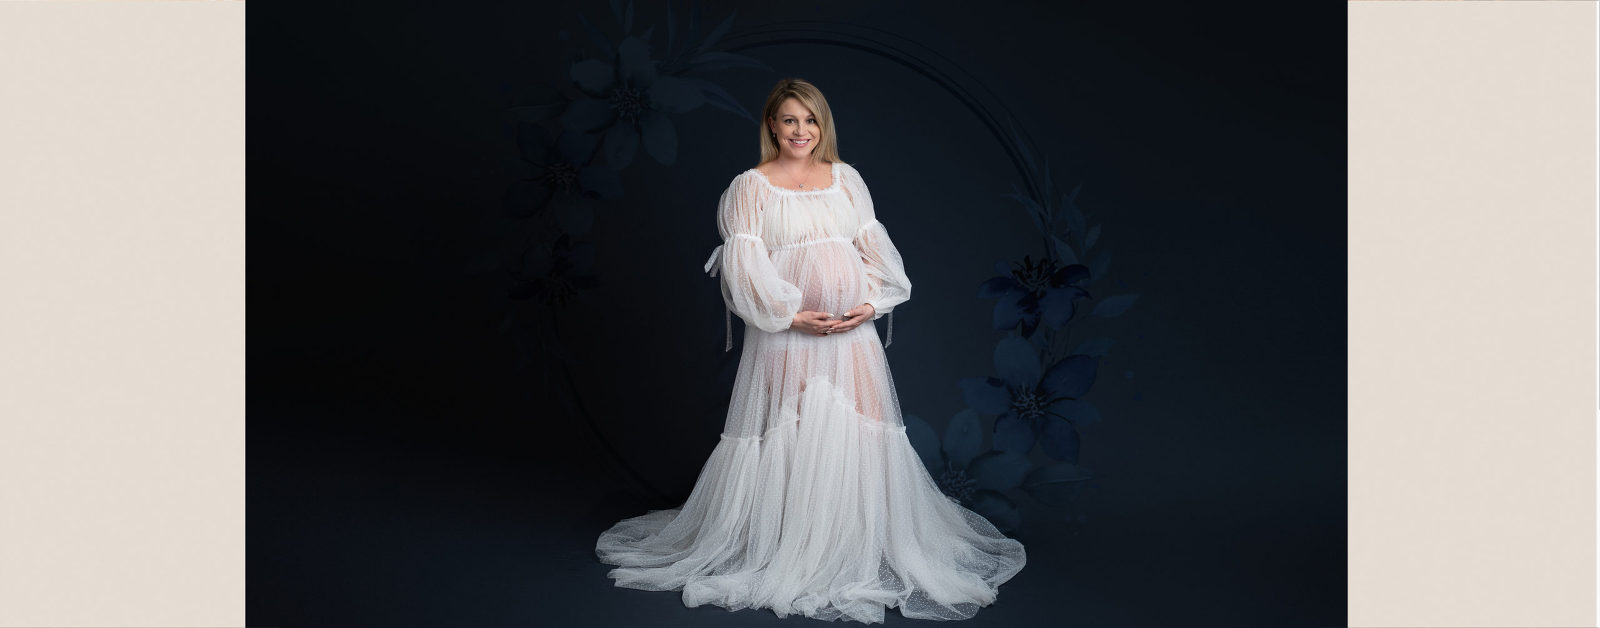 pregnant girl wearing white dress in Chicago photography studio